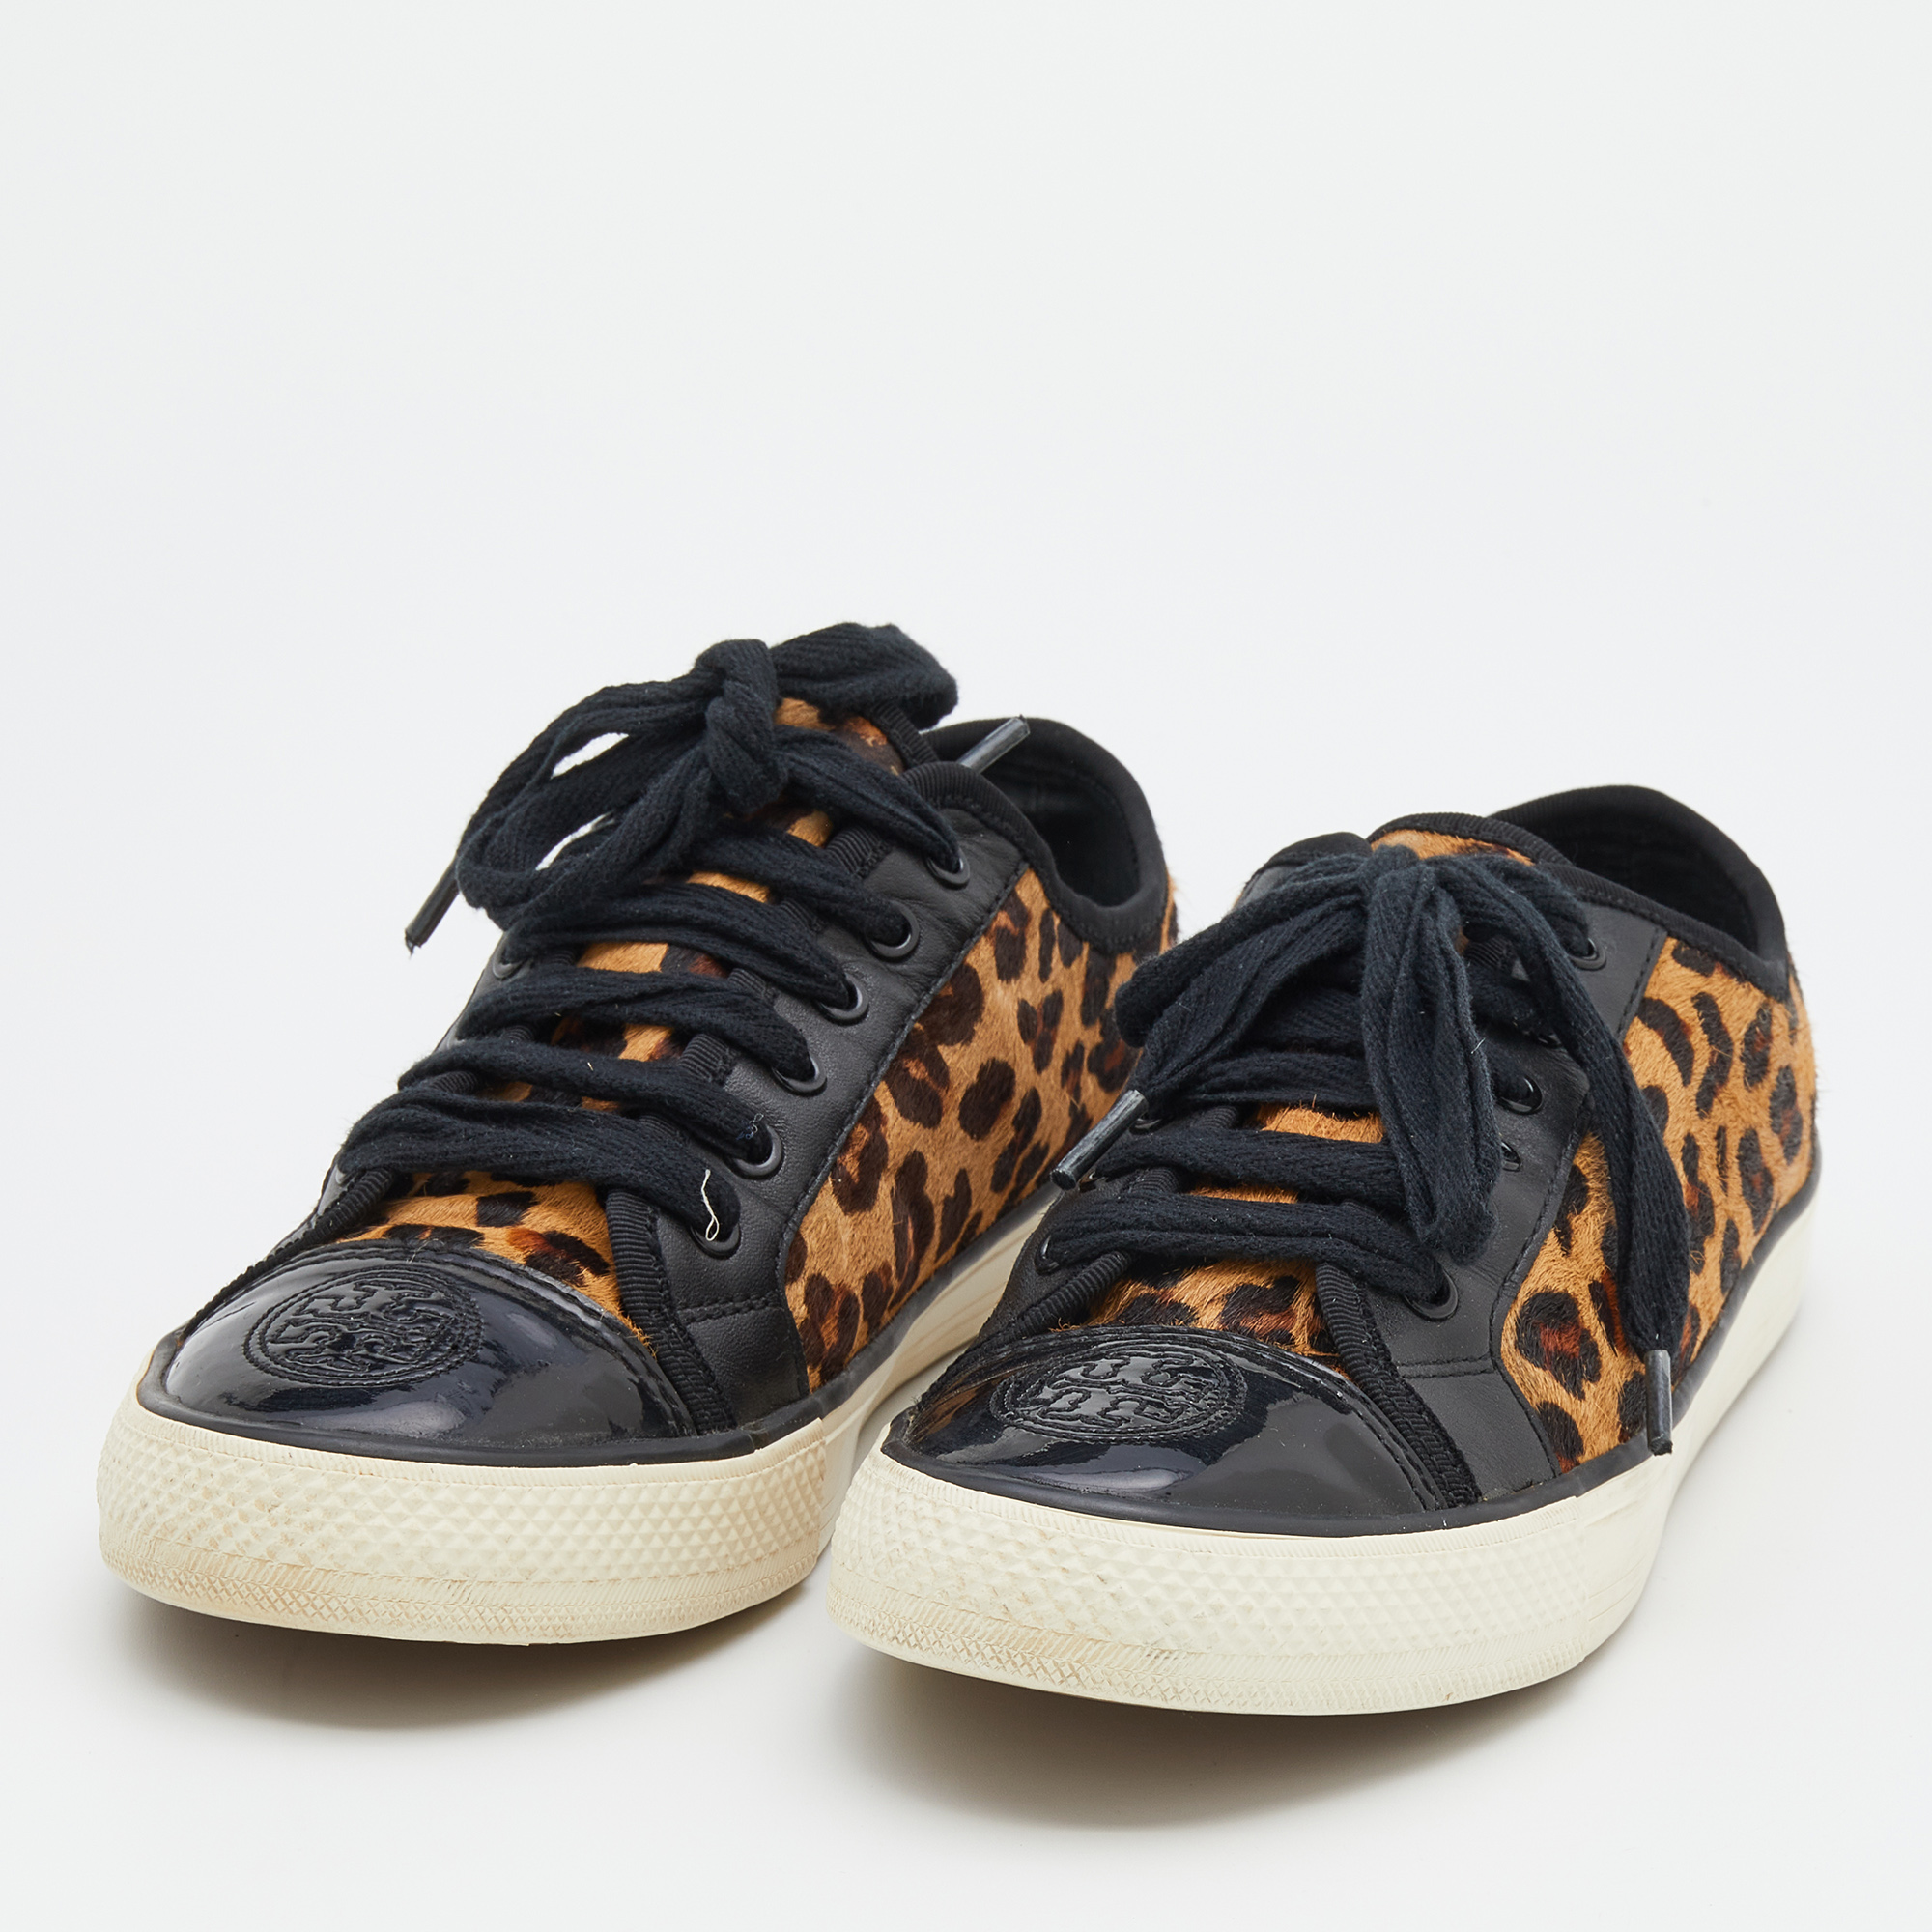 

Tory Burch Black/Brown Leopard Print Calf Hair And Leather Low Top Sneakers Size